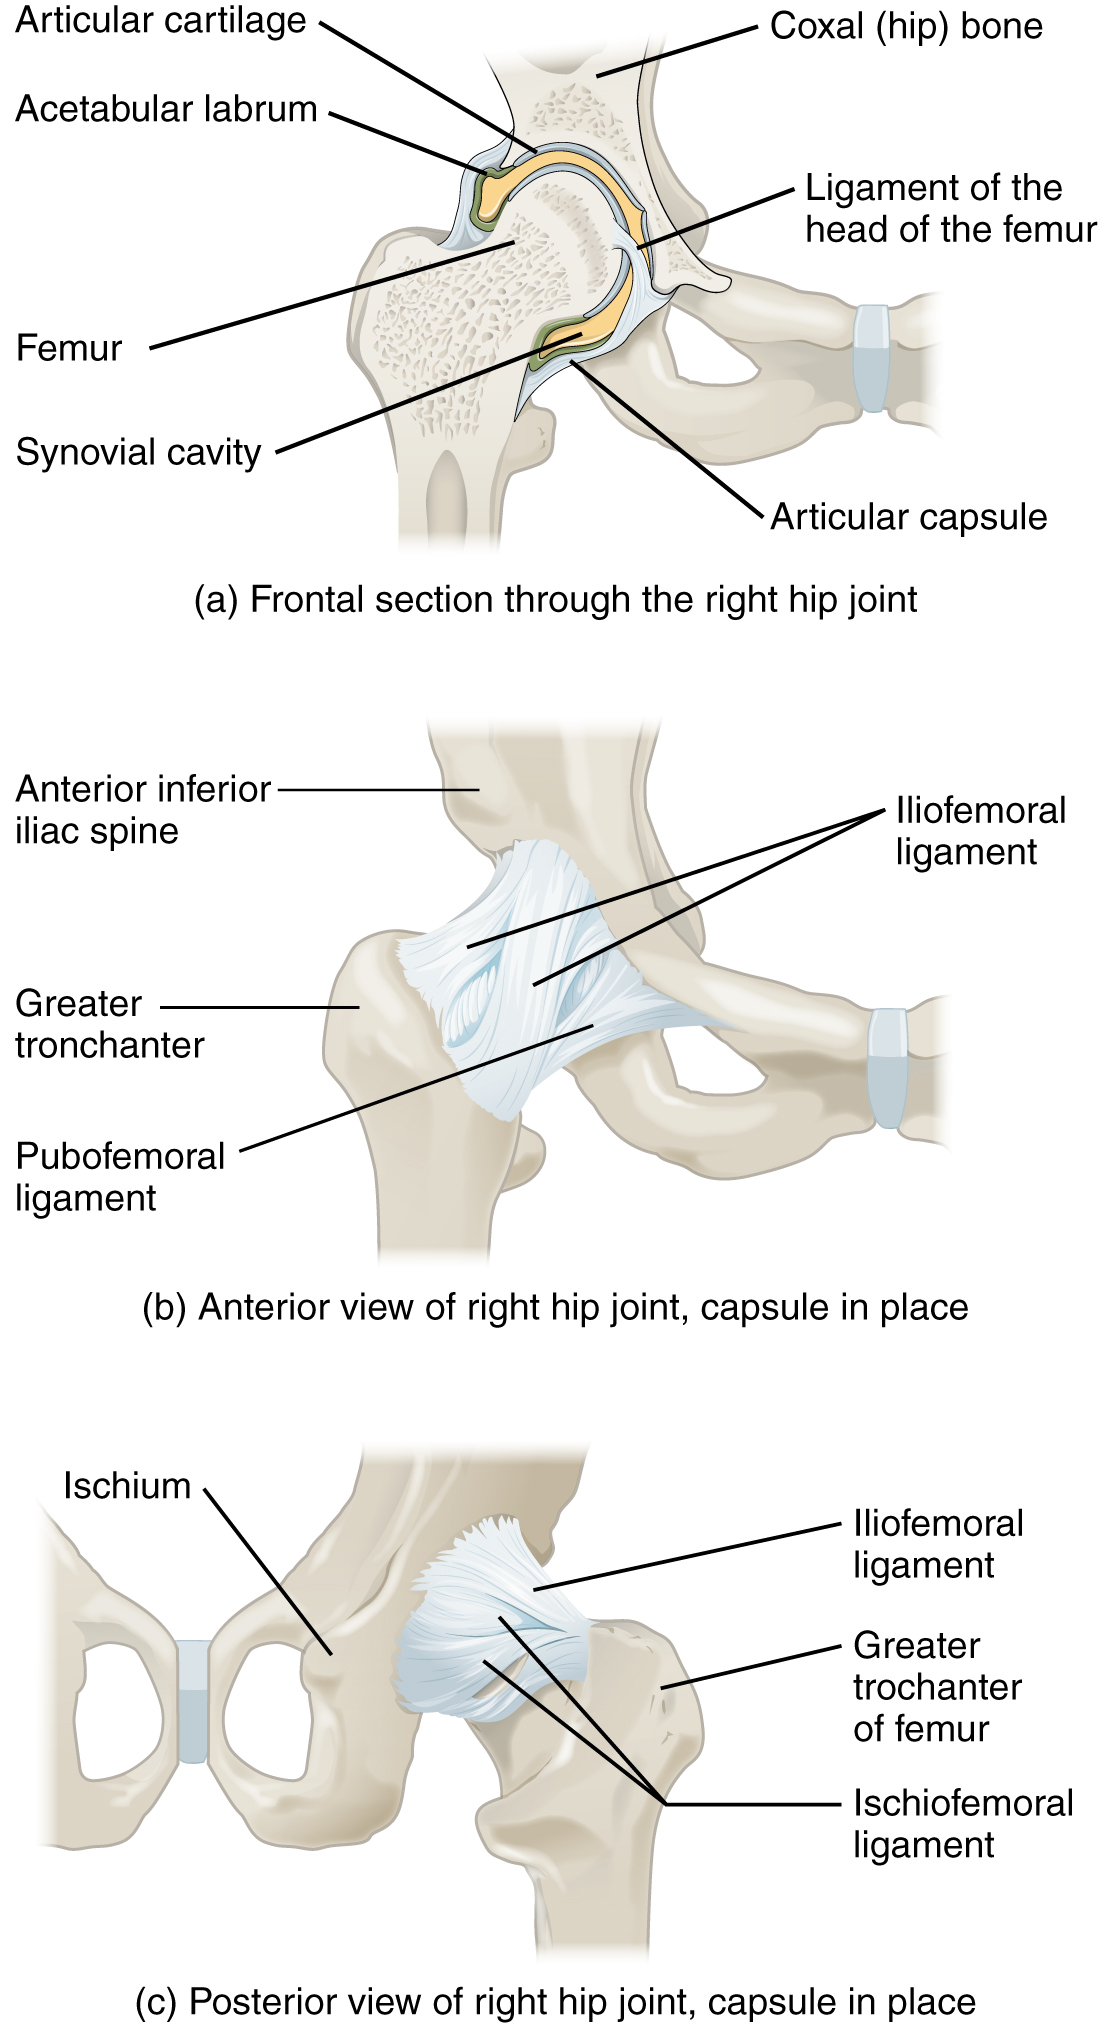 This figure shows different views of the hip joint. The top panel shows the frontal view of the right hip joint, the middle panel shows the anterior view, and the bottom panel shows the posterior view.